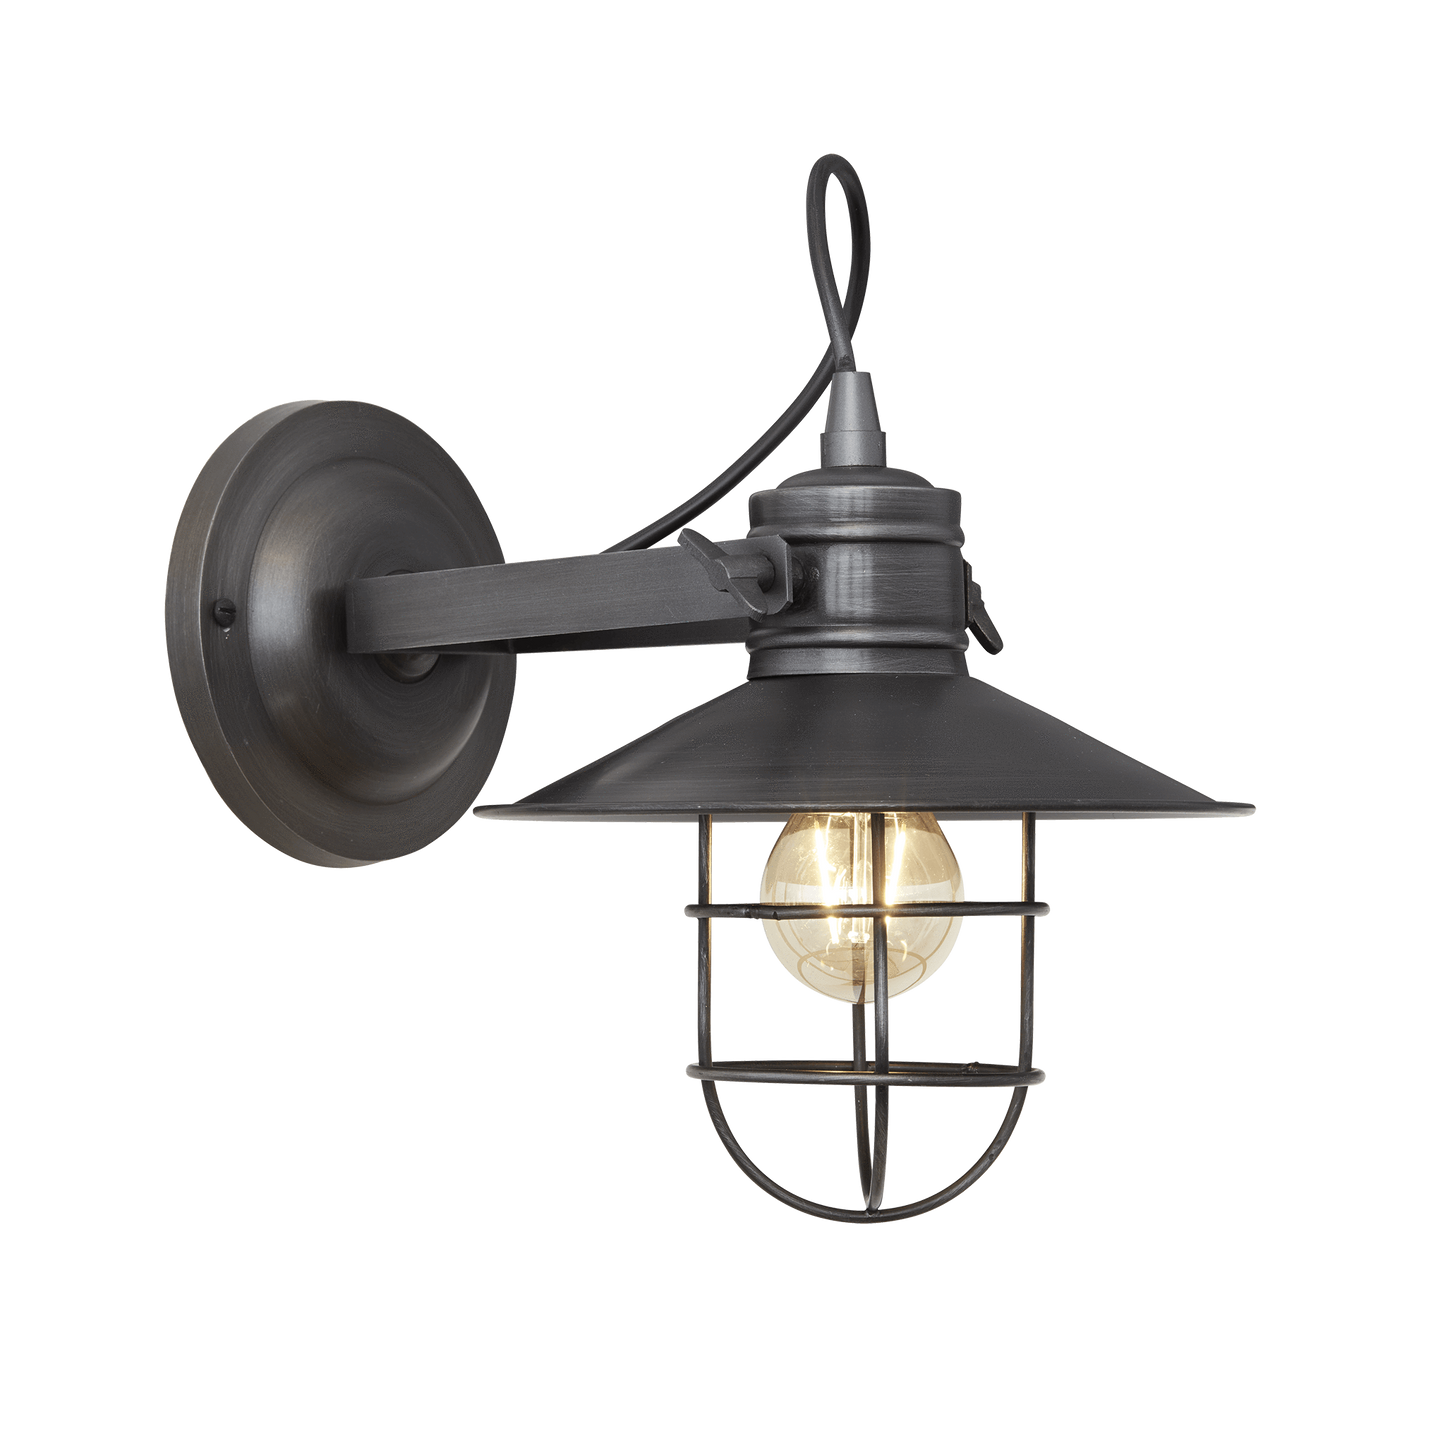 Industville Harbour Wall Light - 6 Inch - Pewter